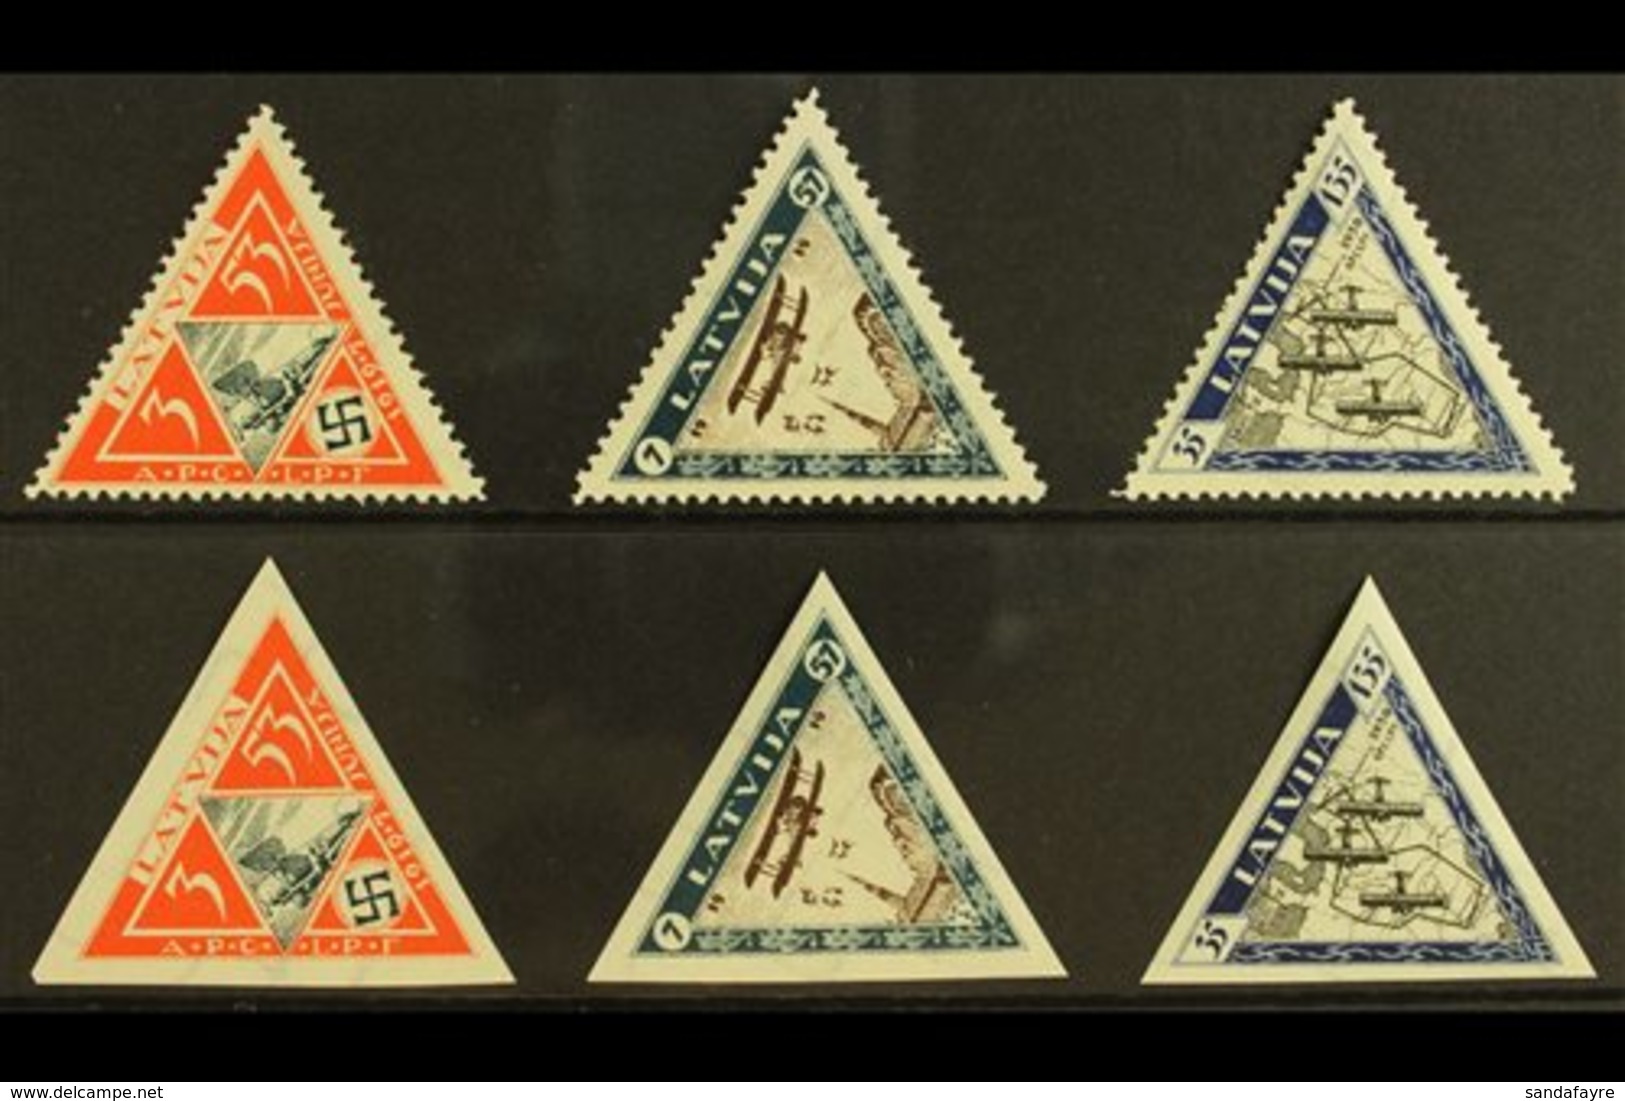 1933  Wounded Airmen Triangular Perforated & Imperforate Sets, Mi 225A/227A & 225B/227B, SG 240A/42A & 240B/42B, Fine Mi - Lettland